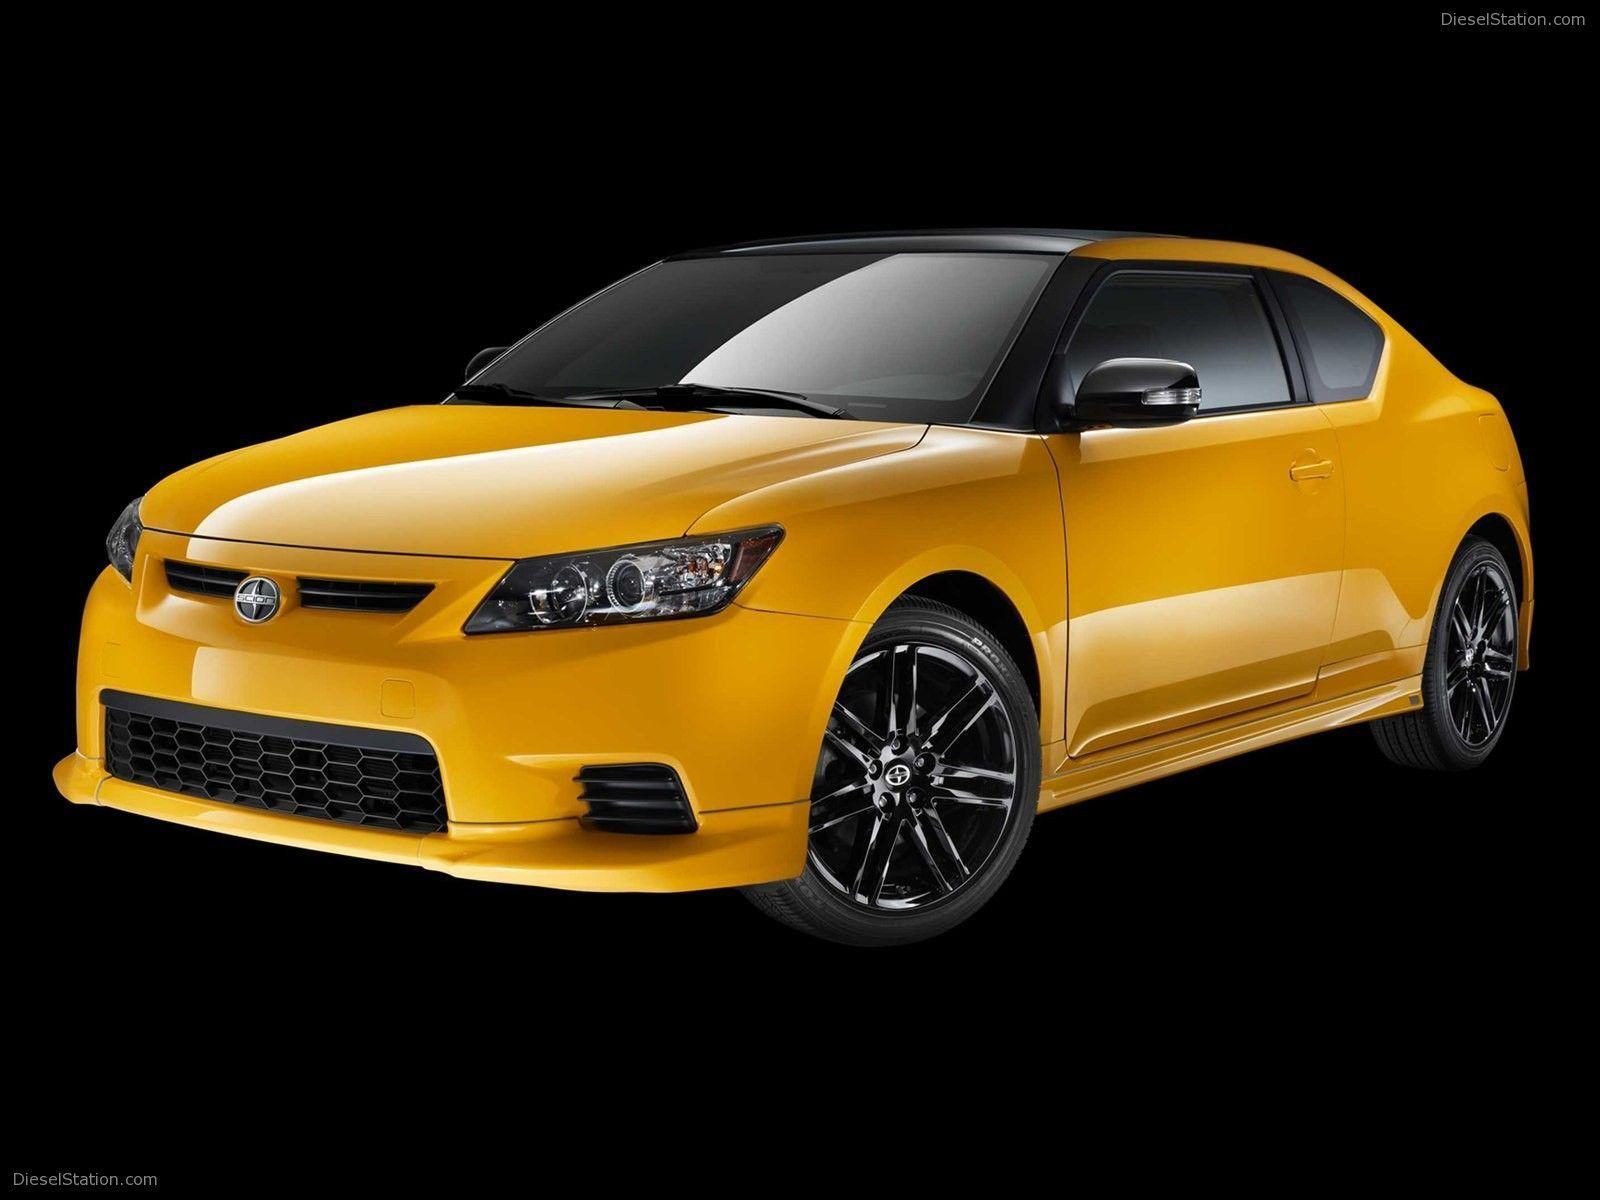 Scion tC RS 7.0 2012 Exotic Car Wallpaper of 14, Diesel Station